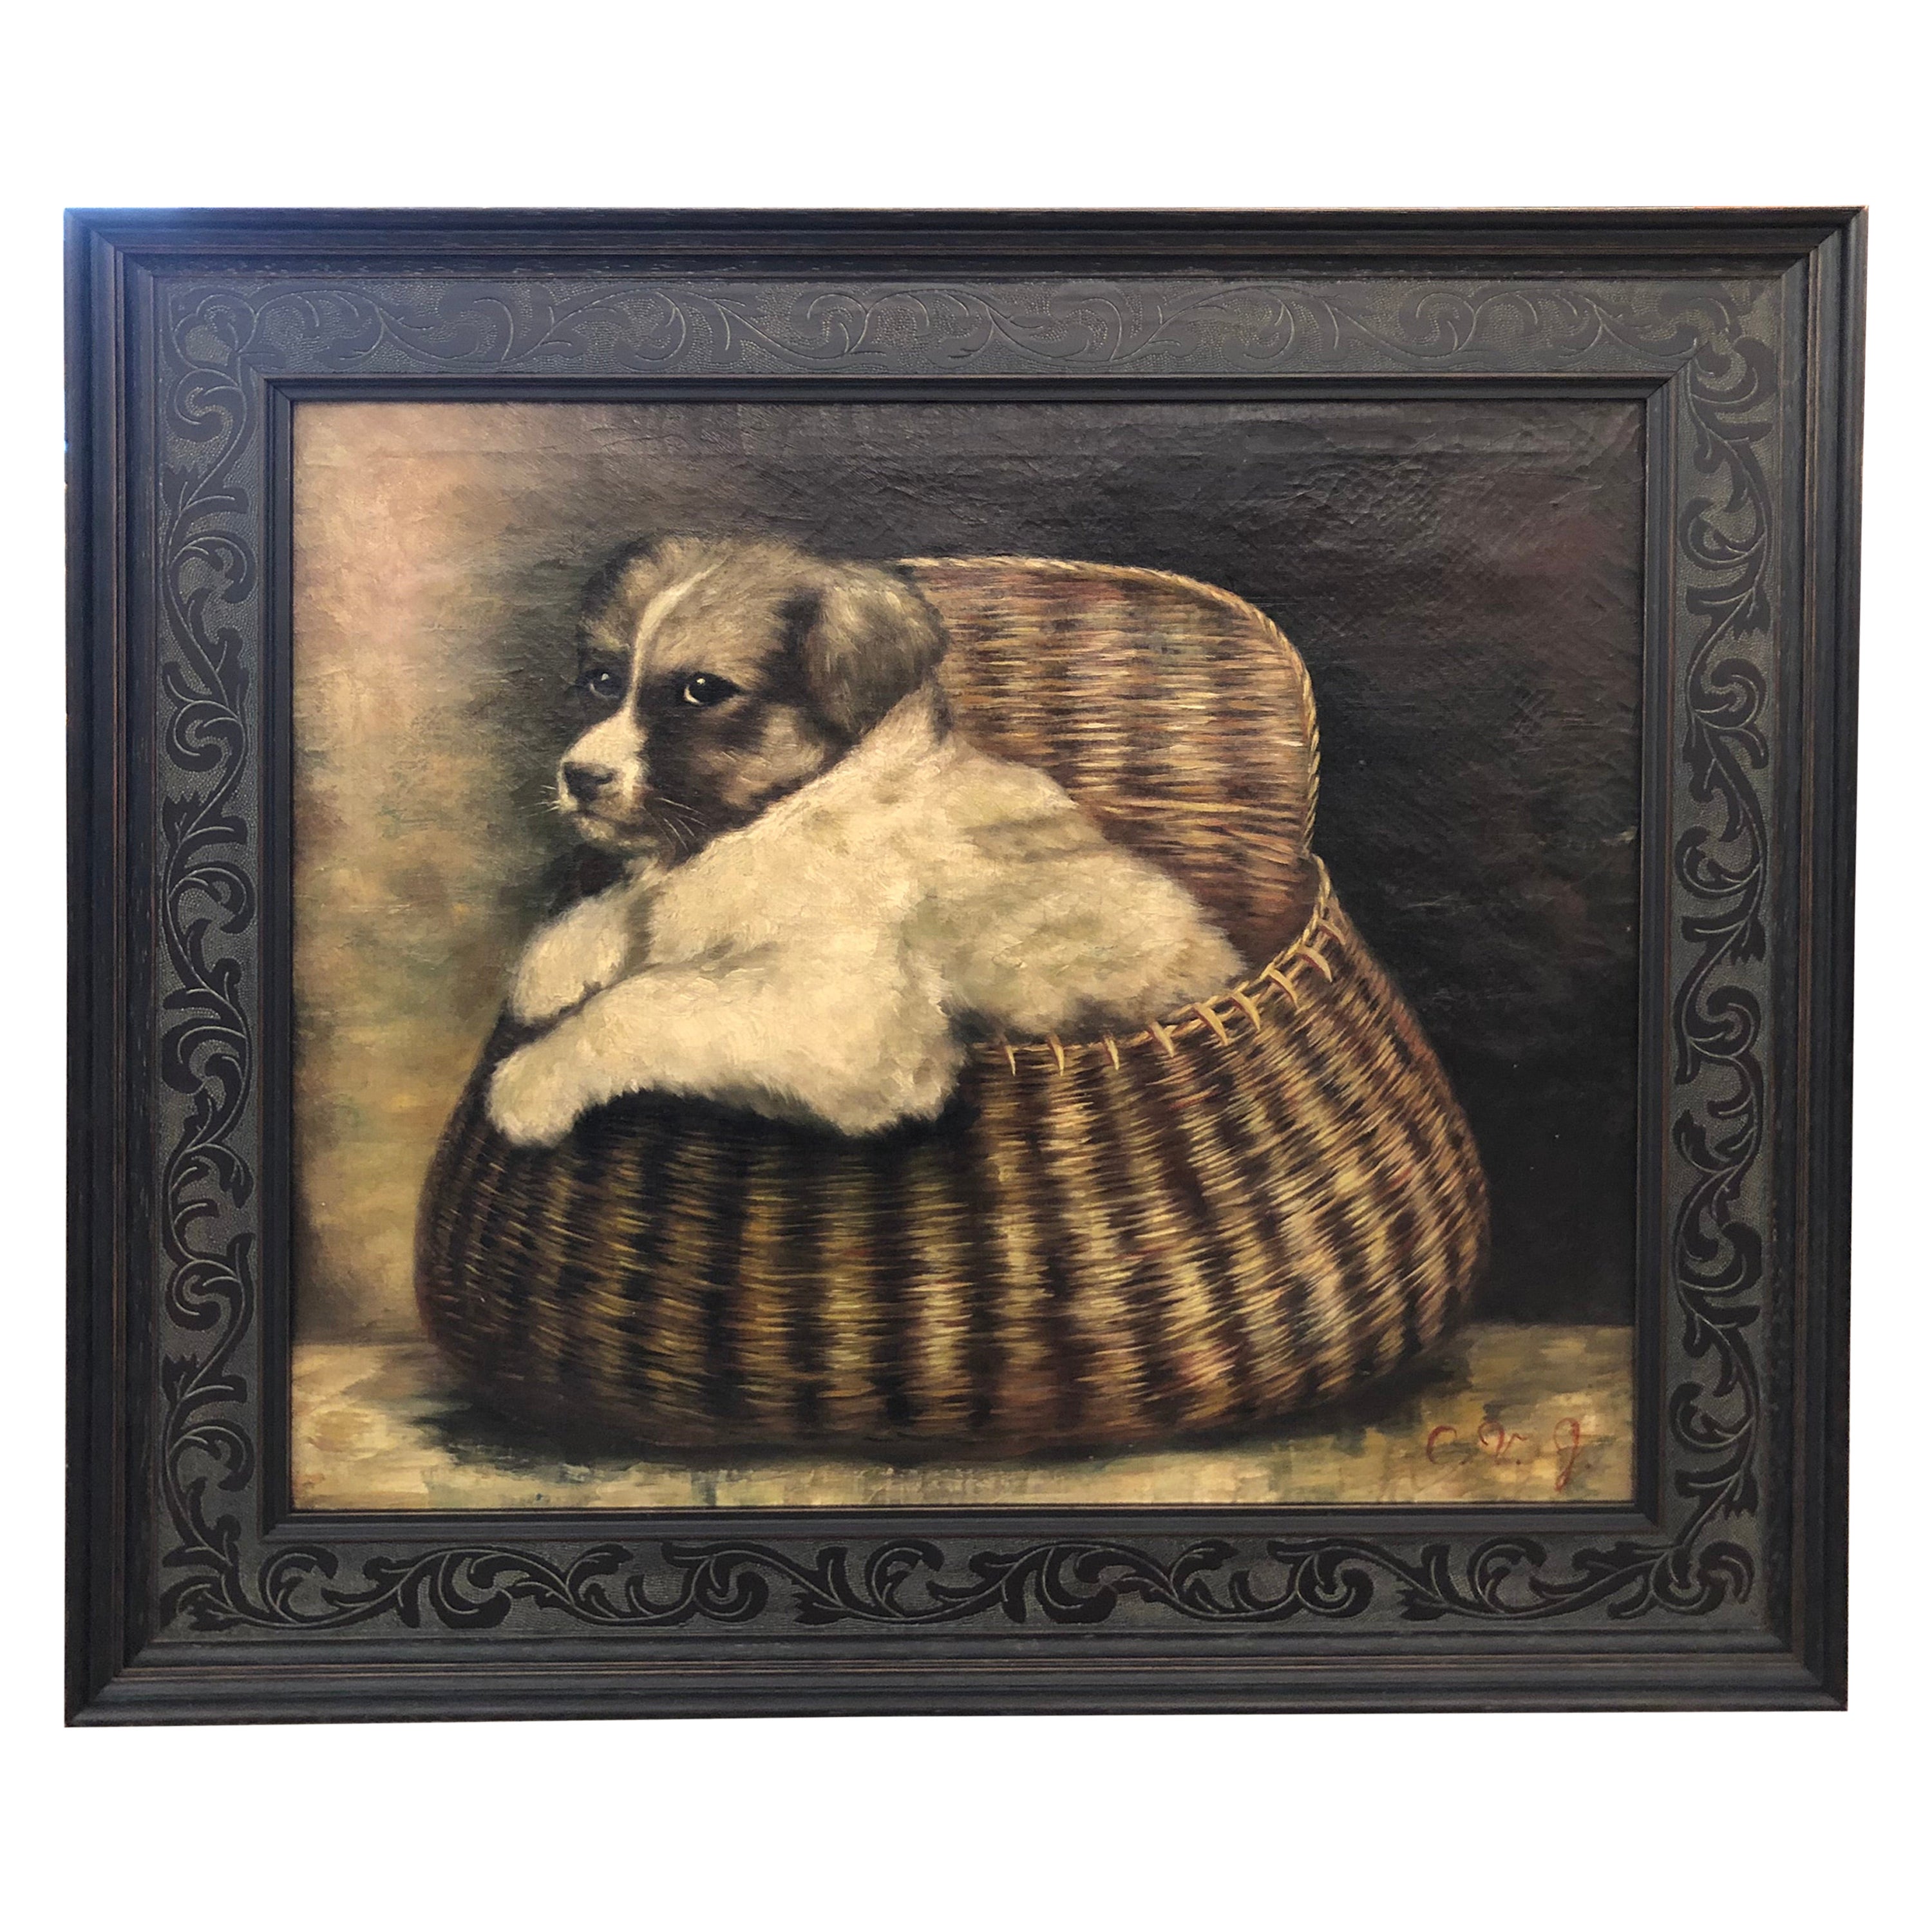 Adorable Original Antique Painting of Puppy in a Basket